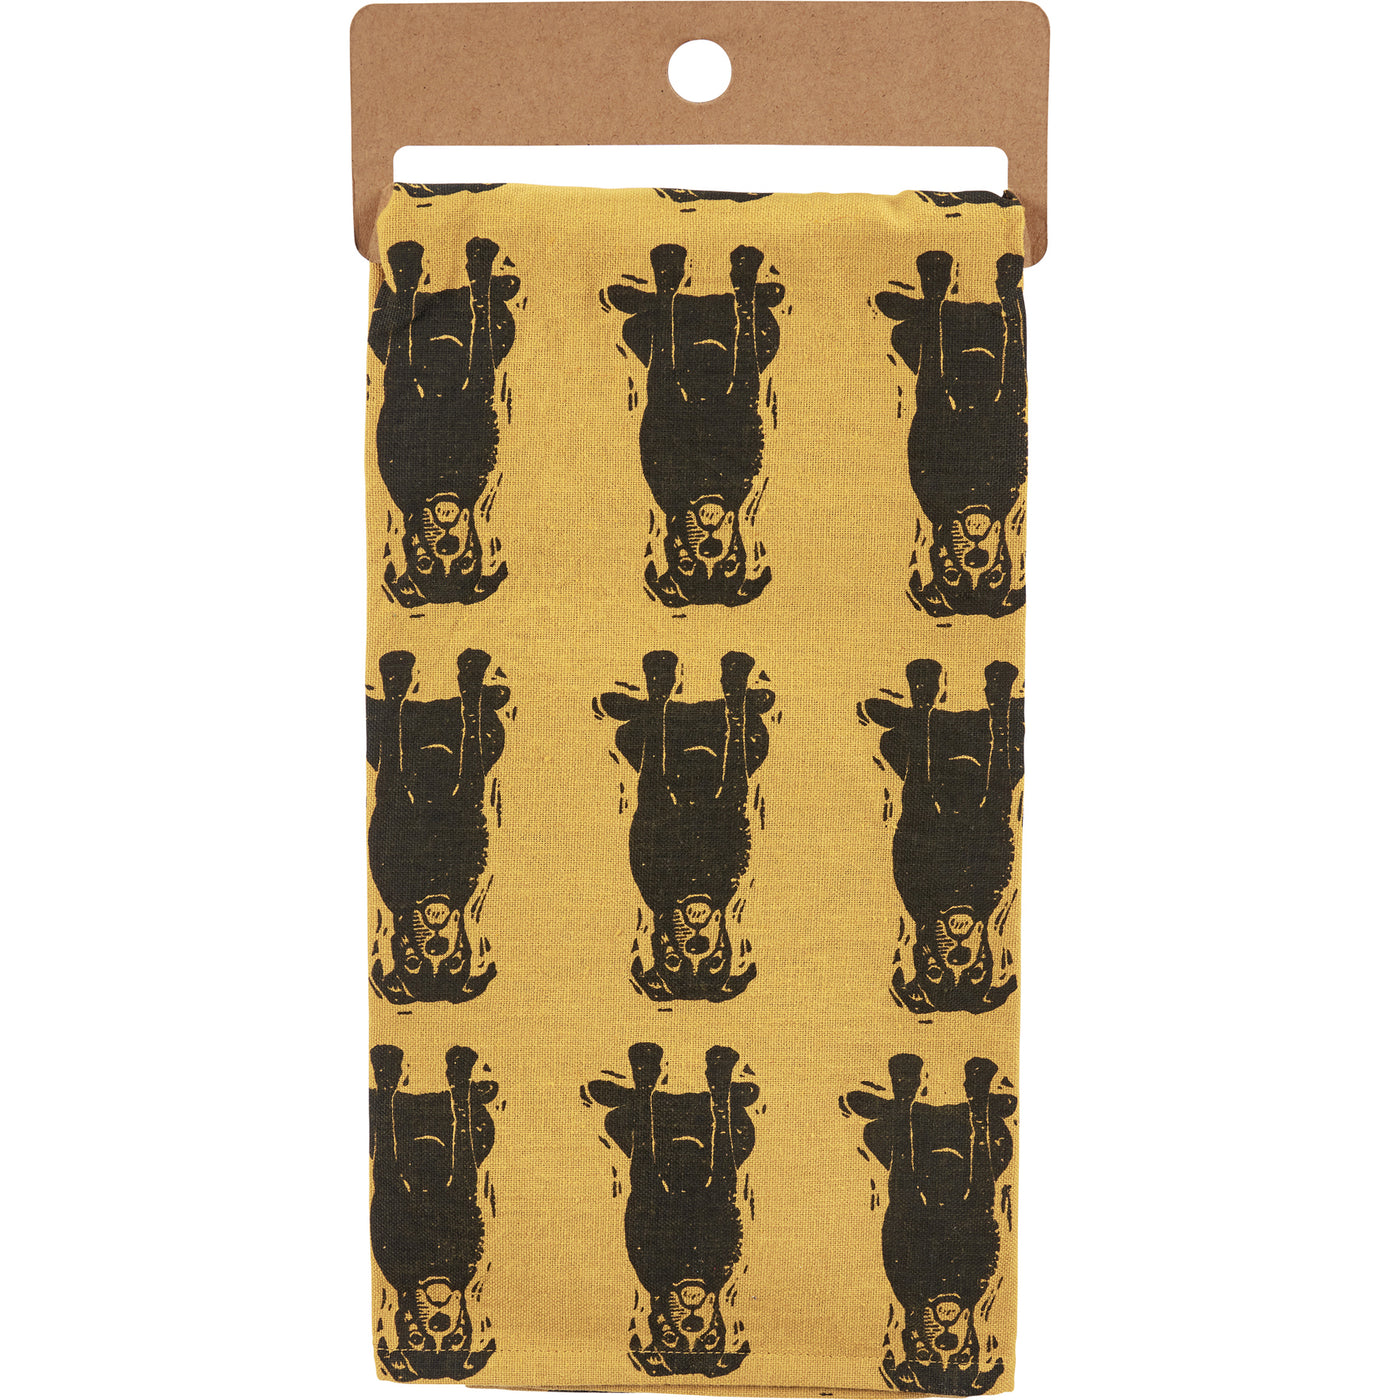 All You Need Is Love And A Boxer Dog Kitchen Towel